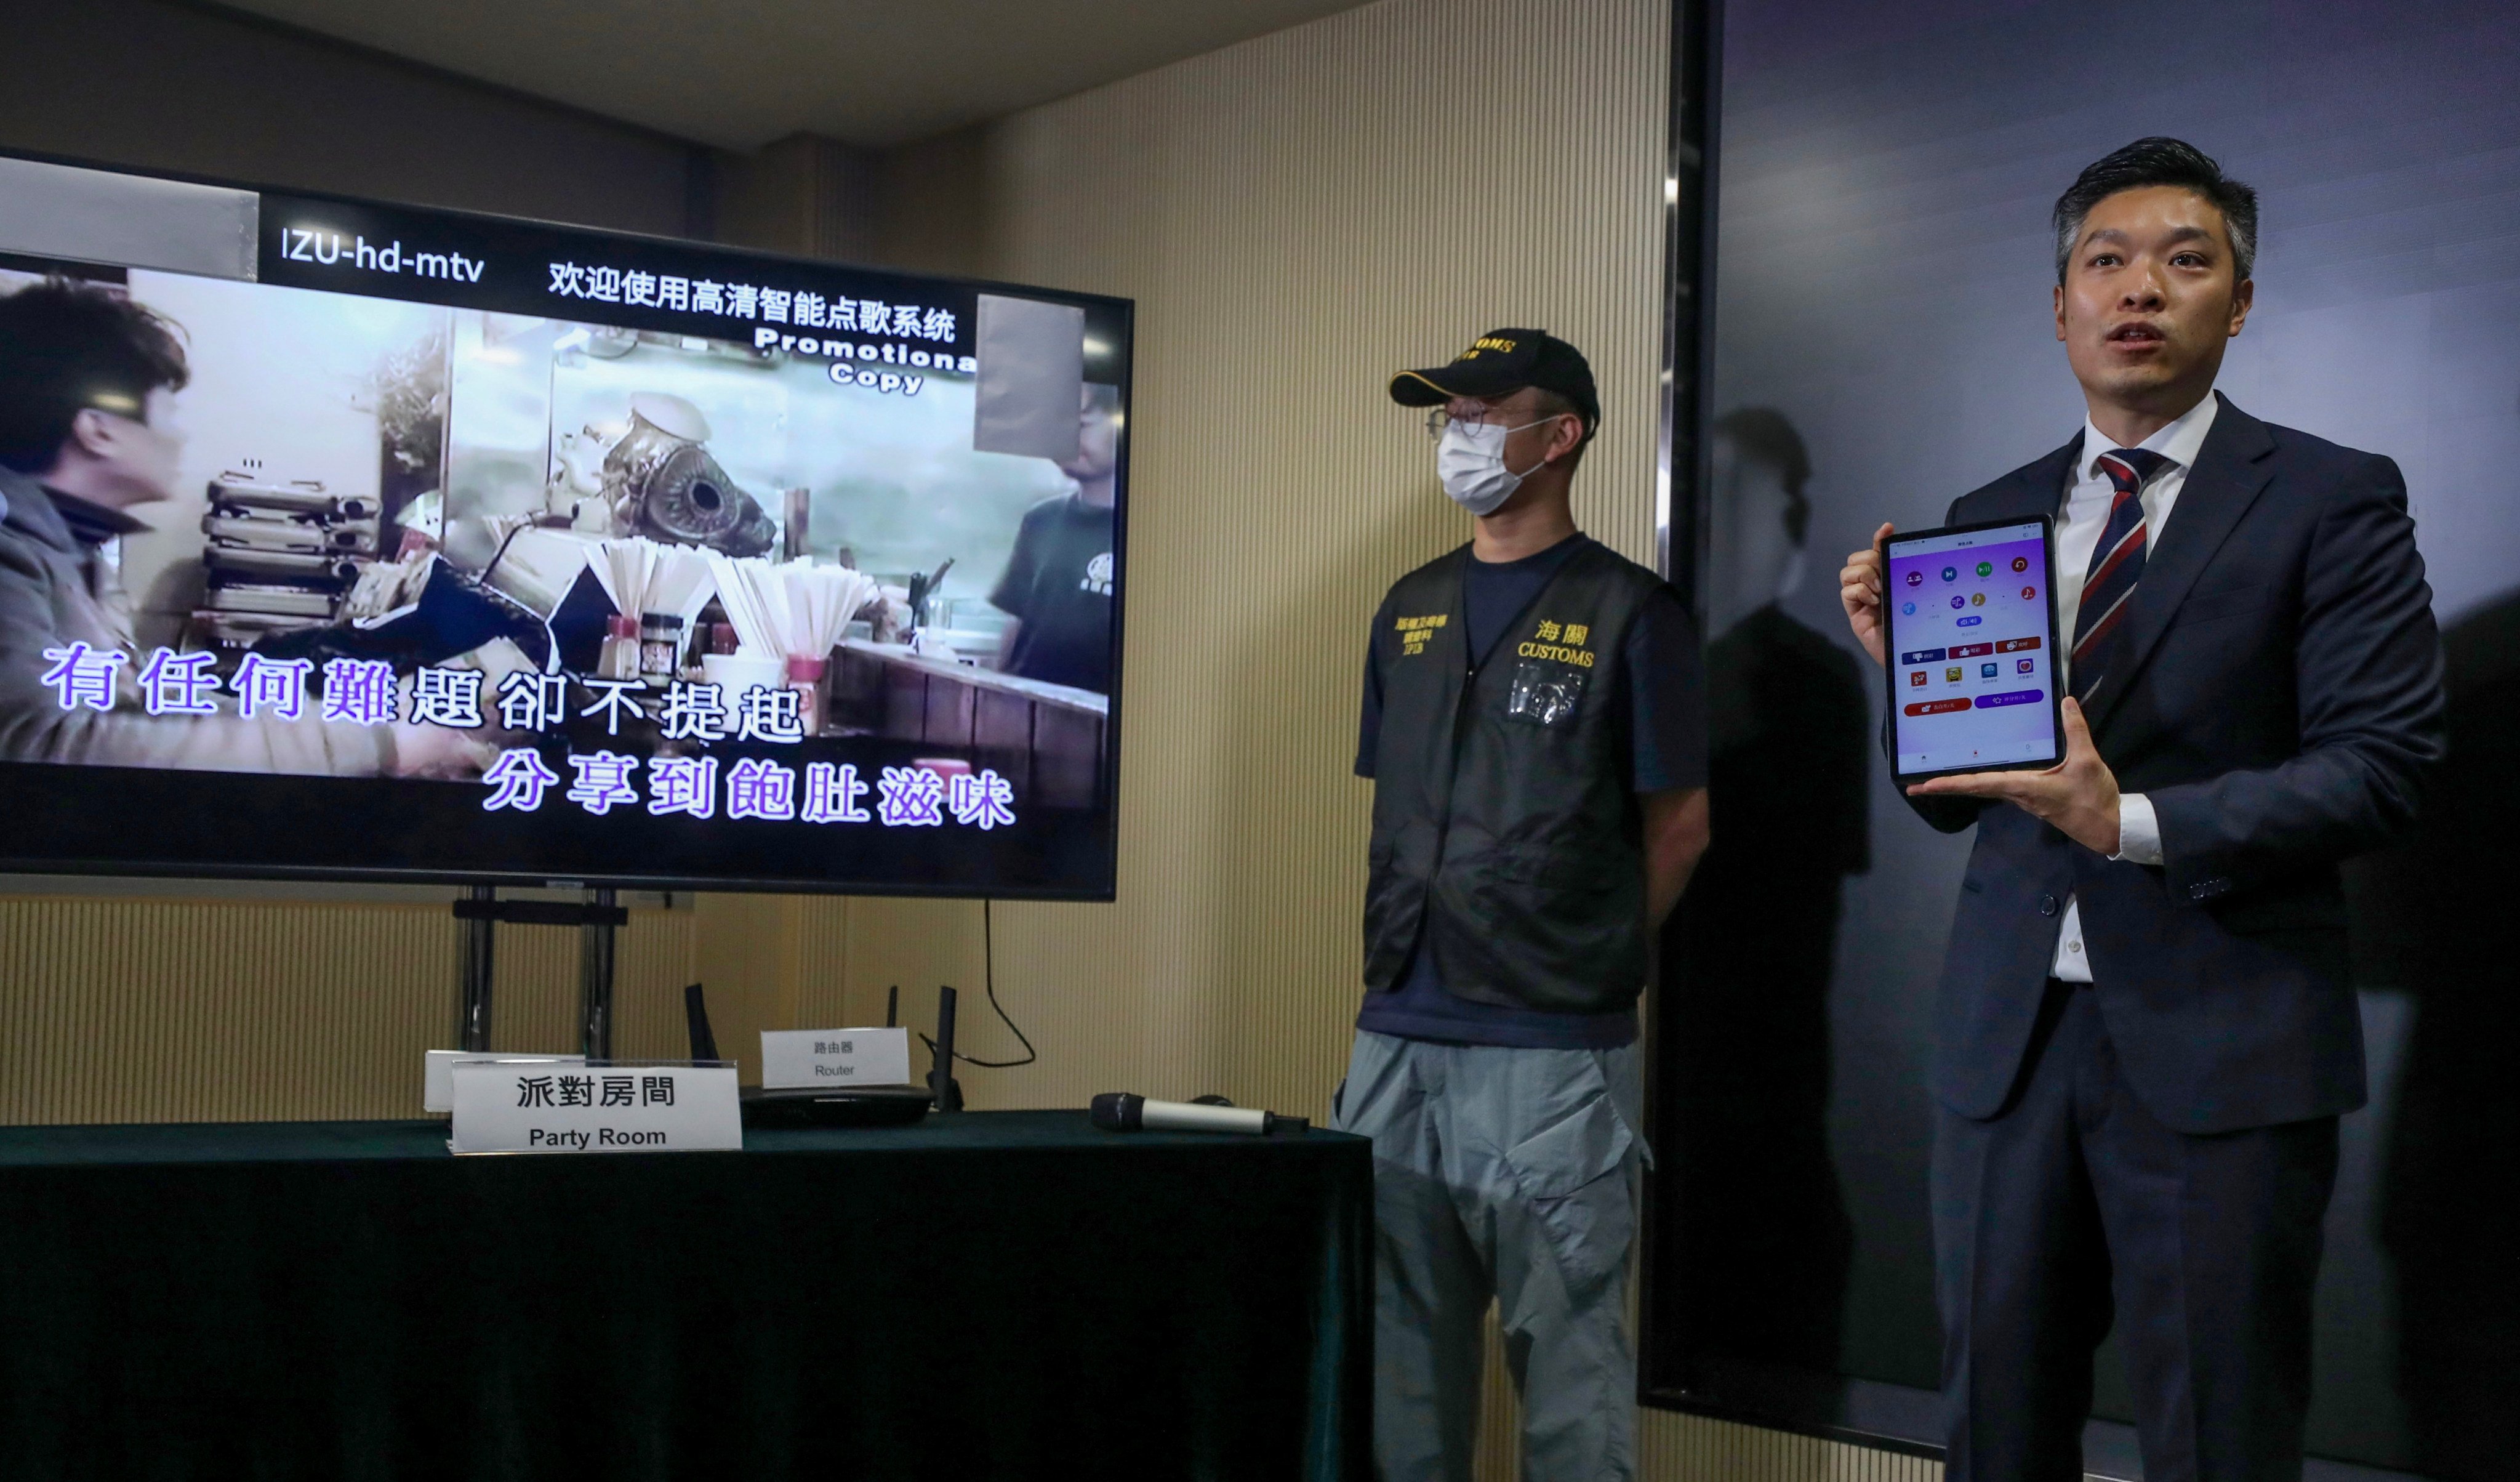 Customs seized 39 players containing 1.8 million karaoke songs suspected of copyright infringement, Photo: Xiaomei Chen